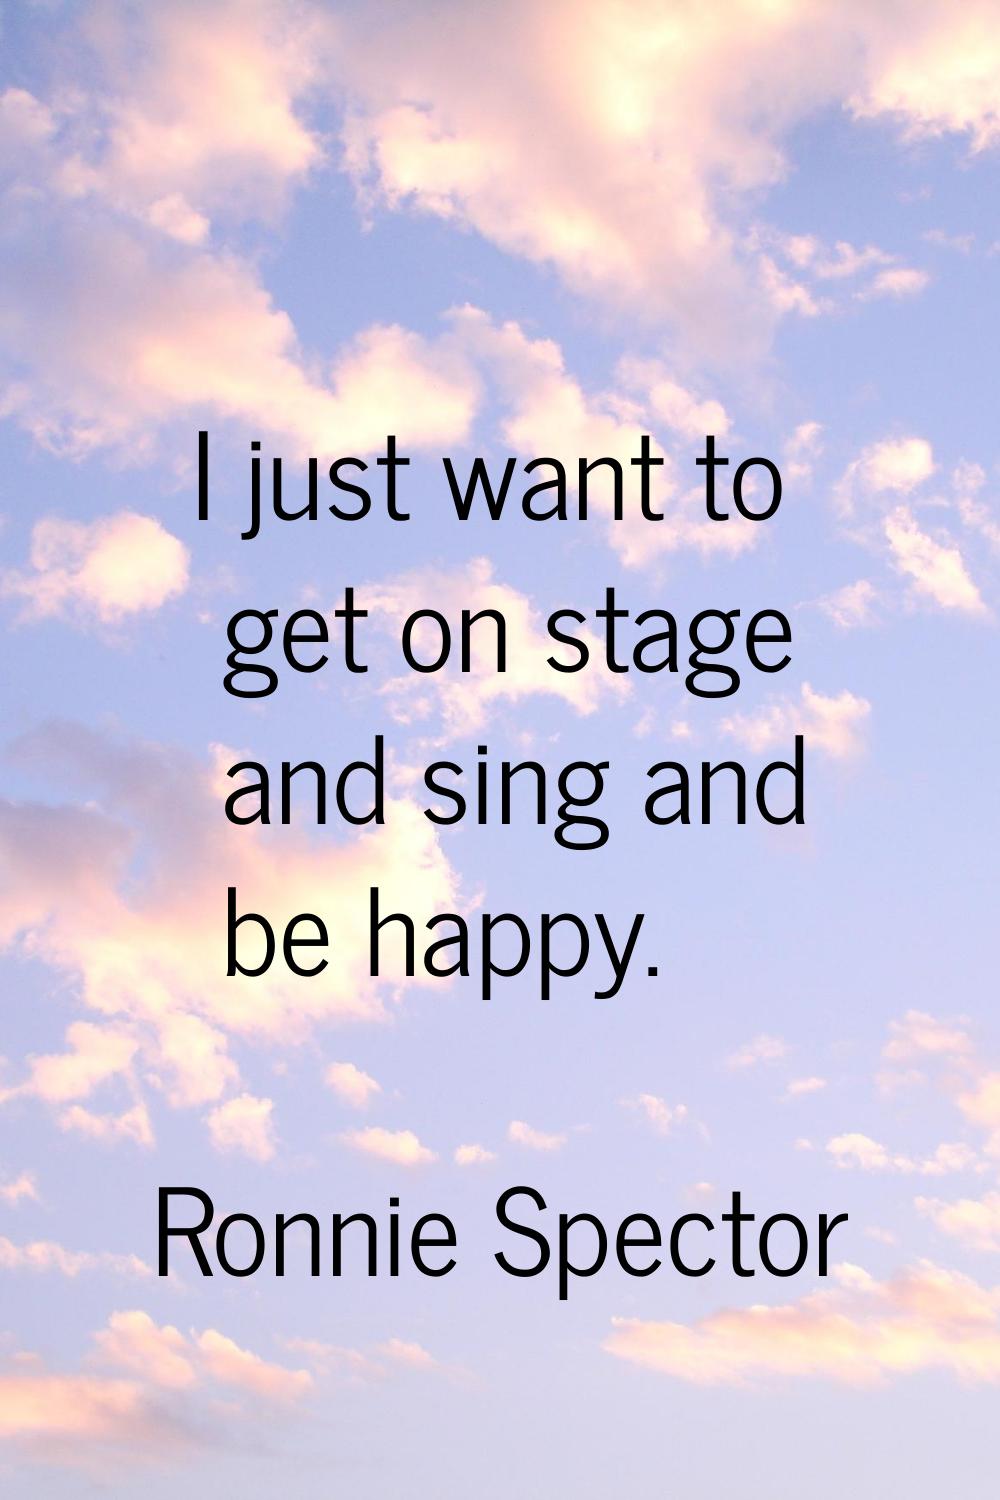 I just want to get on stage and sing and be happy.